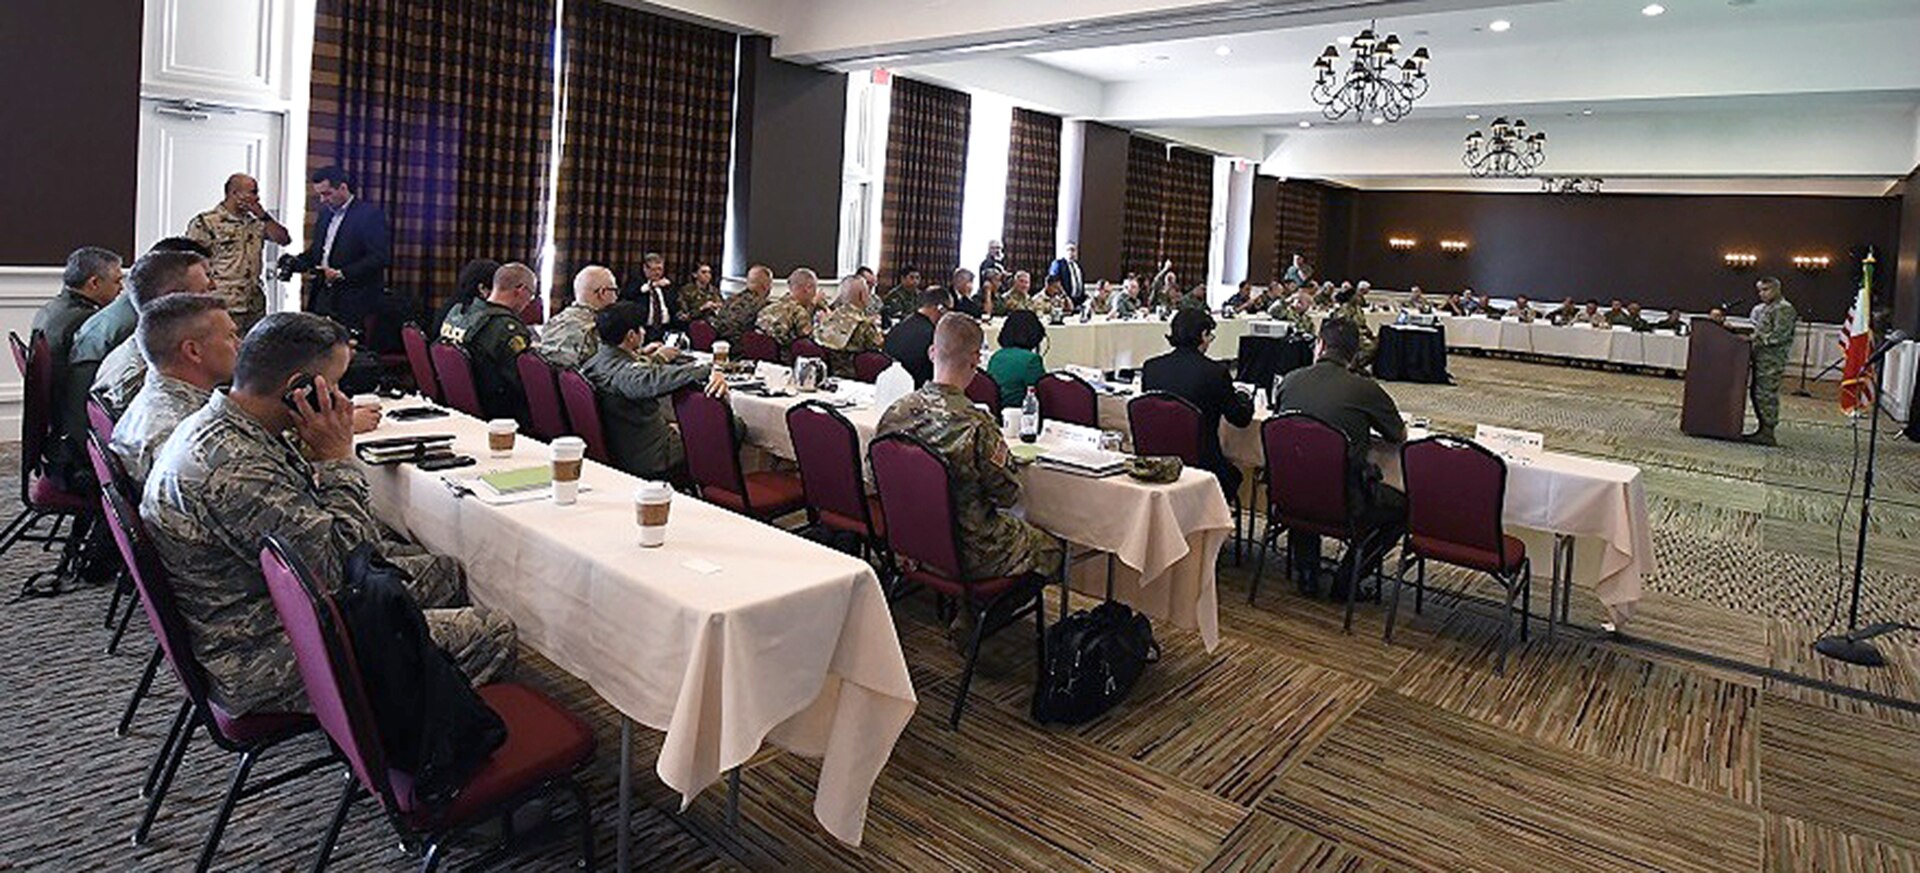 More than 30 general officers and senior leaders from across the Department of Defense; U.S. Army North (Fifth Army) and it’s subordinate units; Arizona, New Mexico and Texas National Guard along with U.S. Customs and Border Patrol; and Secretaría de la Defensa Nacional (SEDENA) of the Mexican Army met for the annual Border Commanders Conference to discuss current trends taking place along the U.S-Mexico border in Tucson, Ariz., April 3-6.